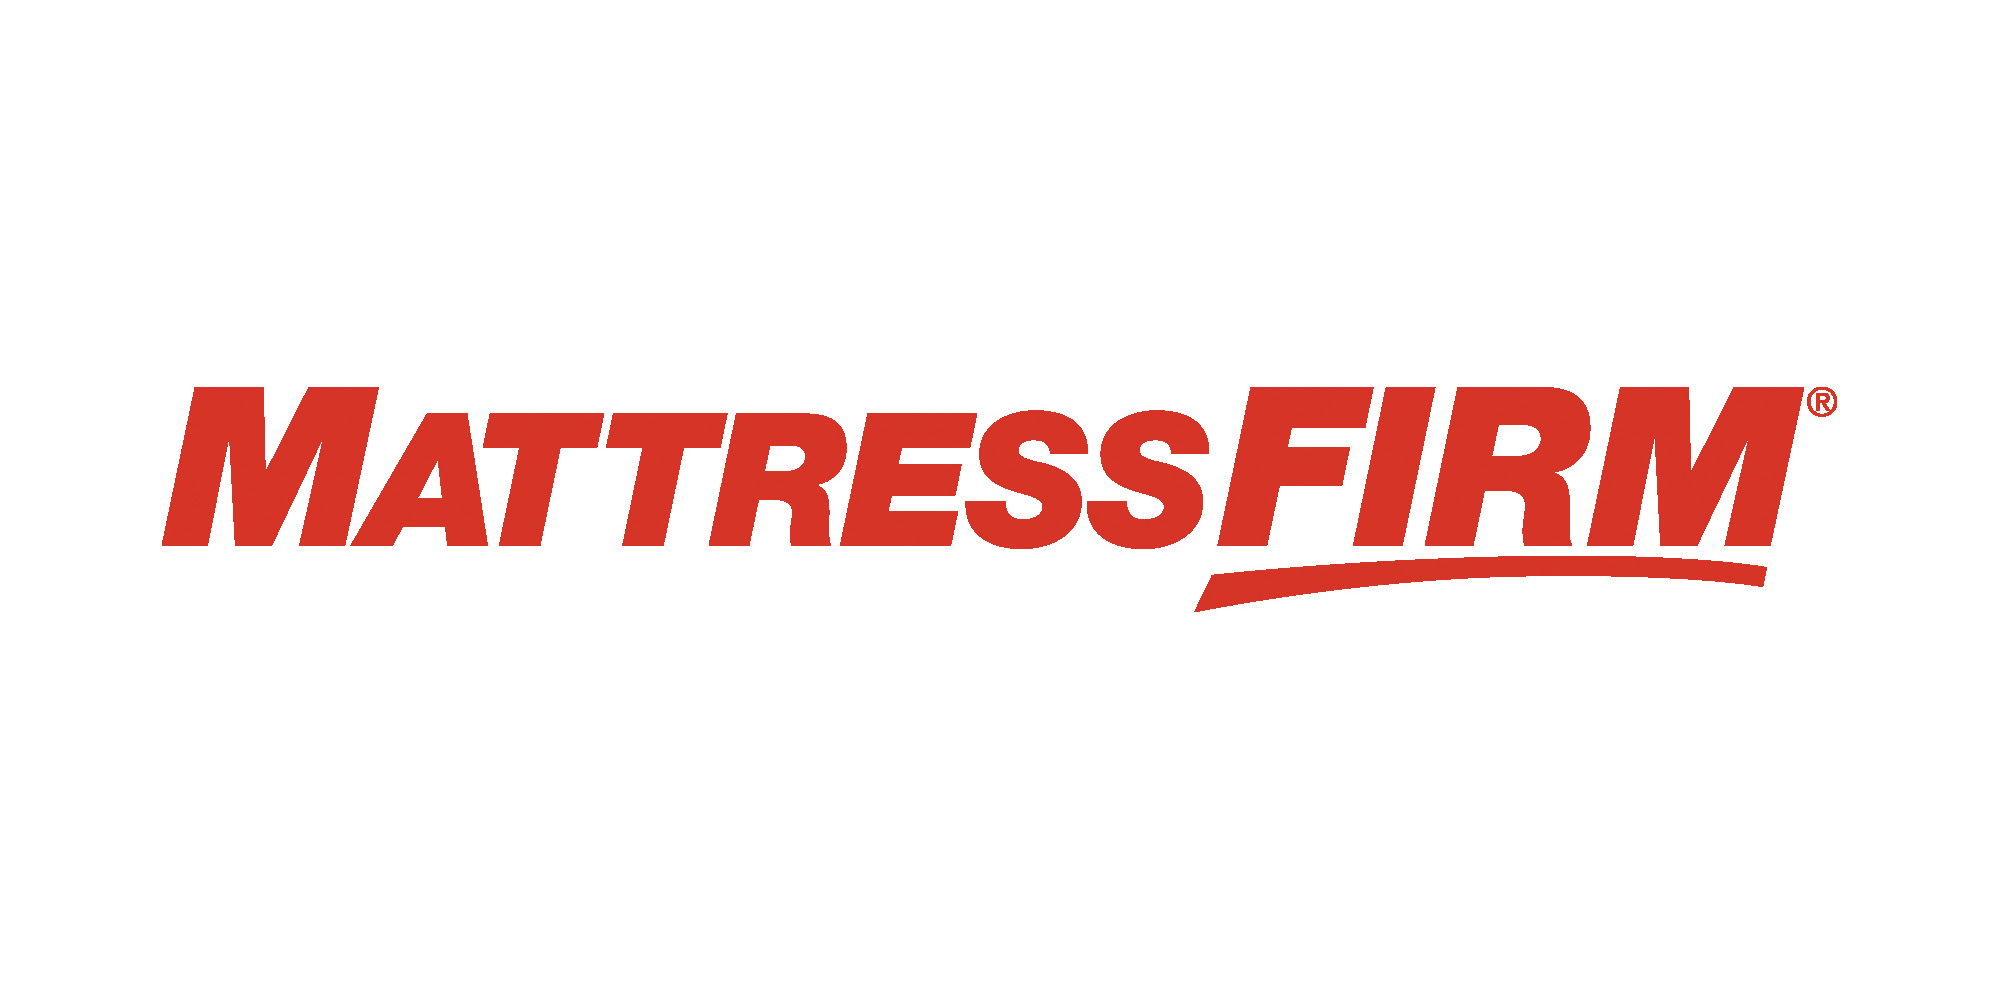 mattress firm delivery cost